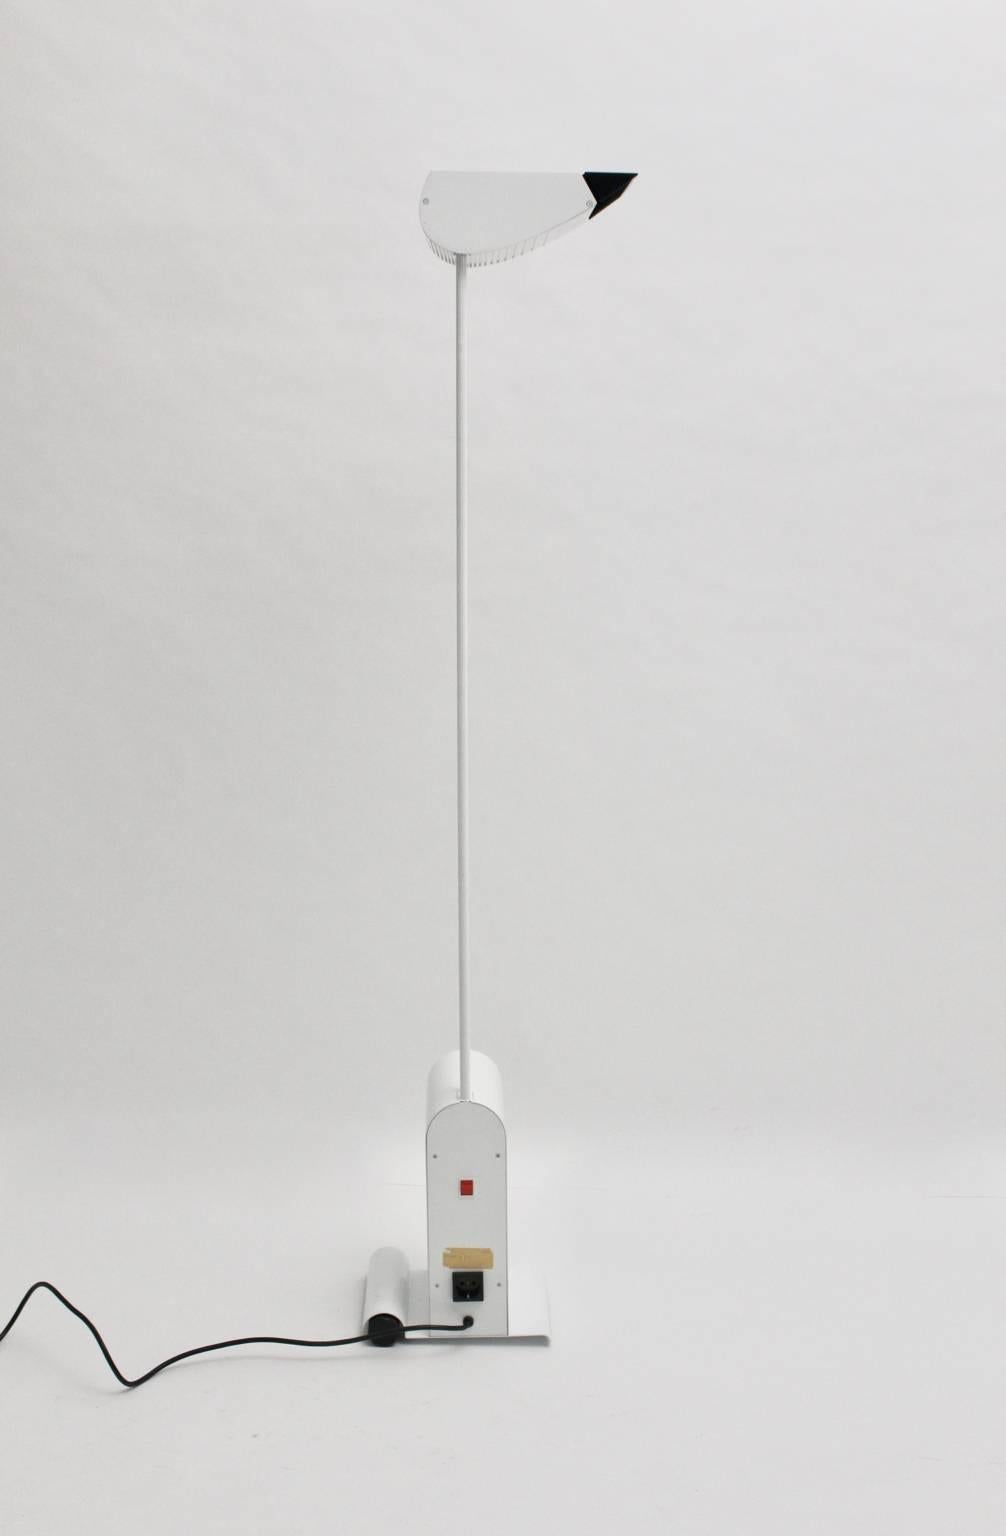 This modernist white vintage floor lamp was designed by Hartmut Engel 1985 and executed by Zumtobel.
It consists of white enameled metal and plastic and shows a movable flap on the shade.
The lamp has one roll on the base for moving.
Also the floor